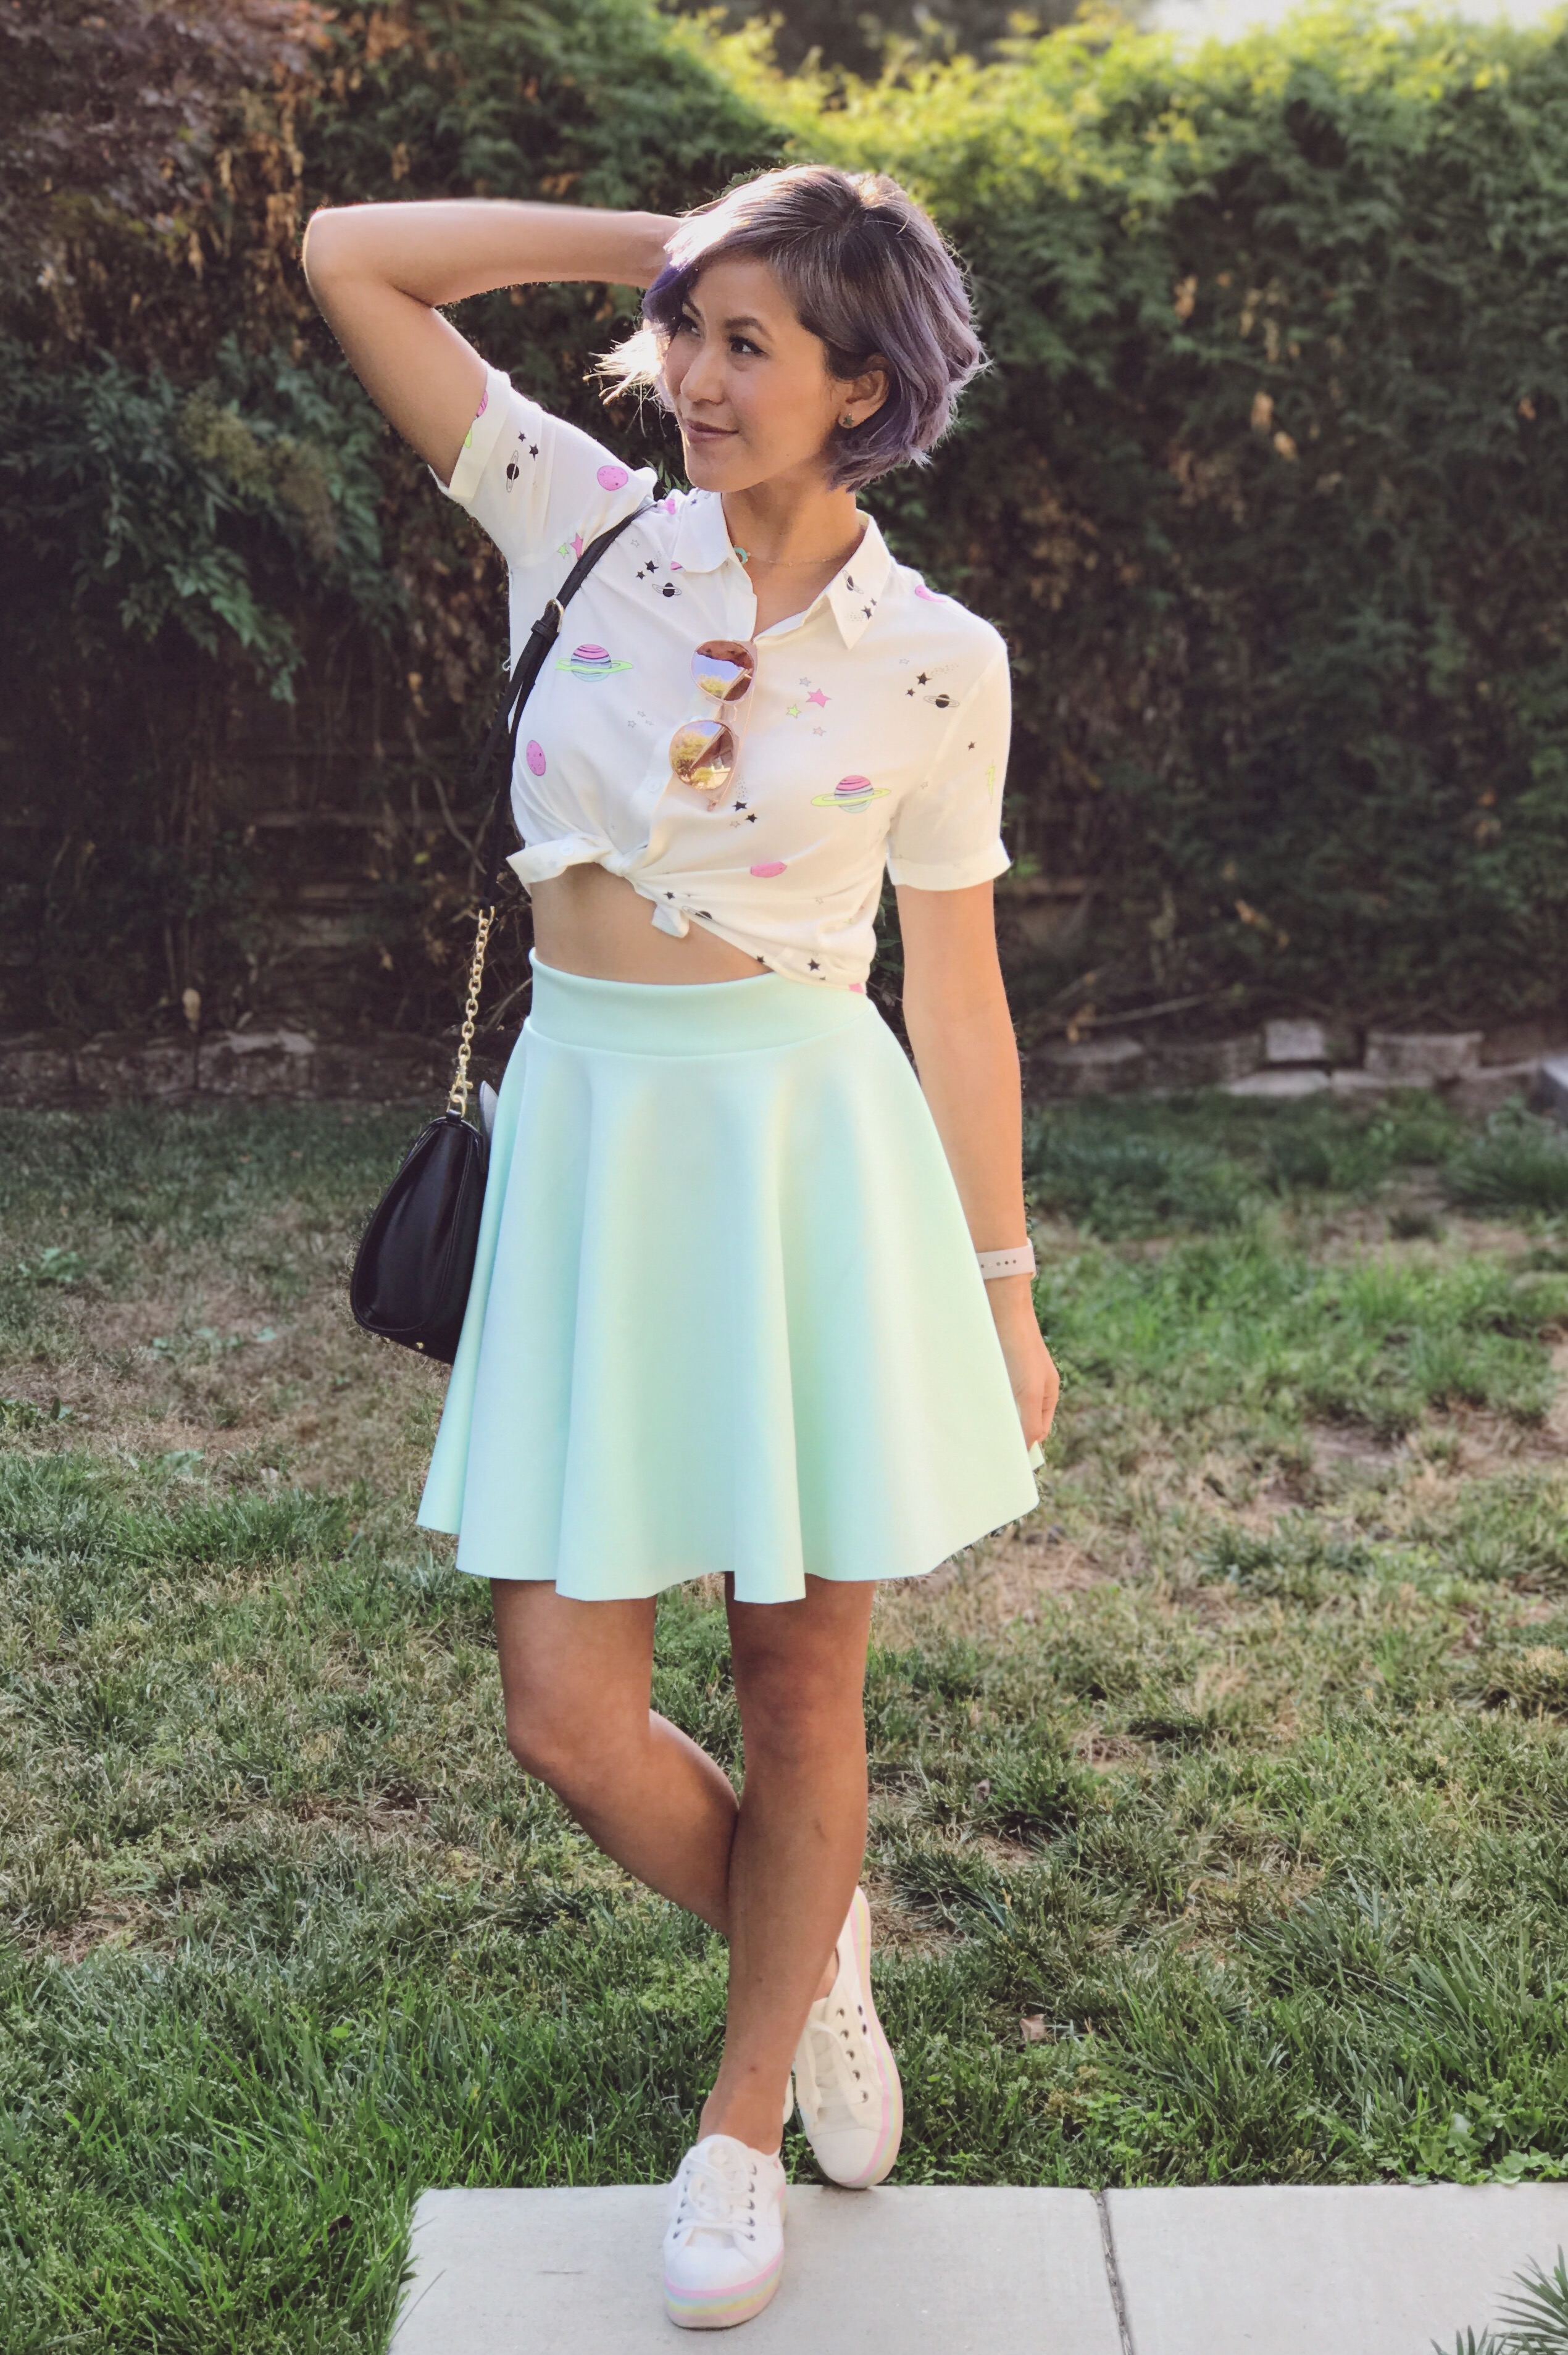 Galaxy print shirt and mint green skirt outfit